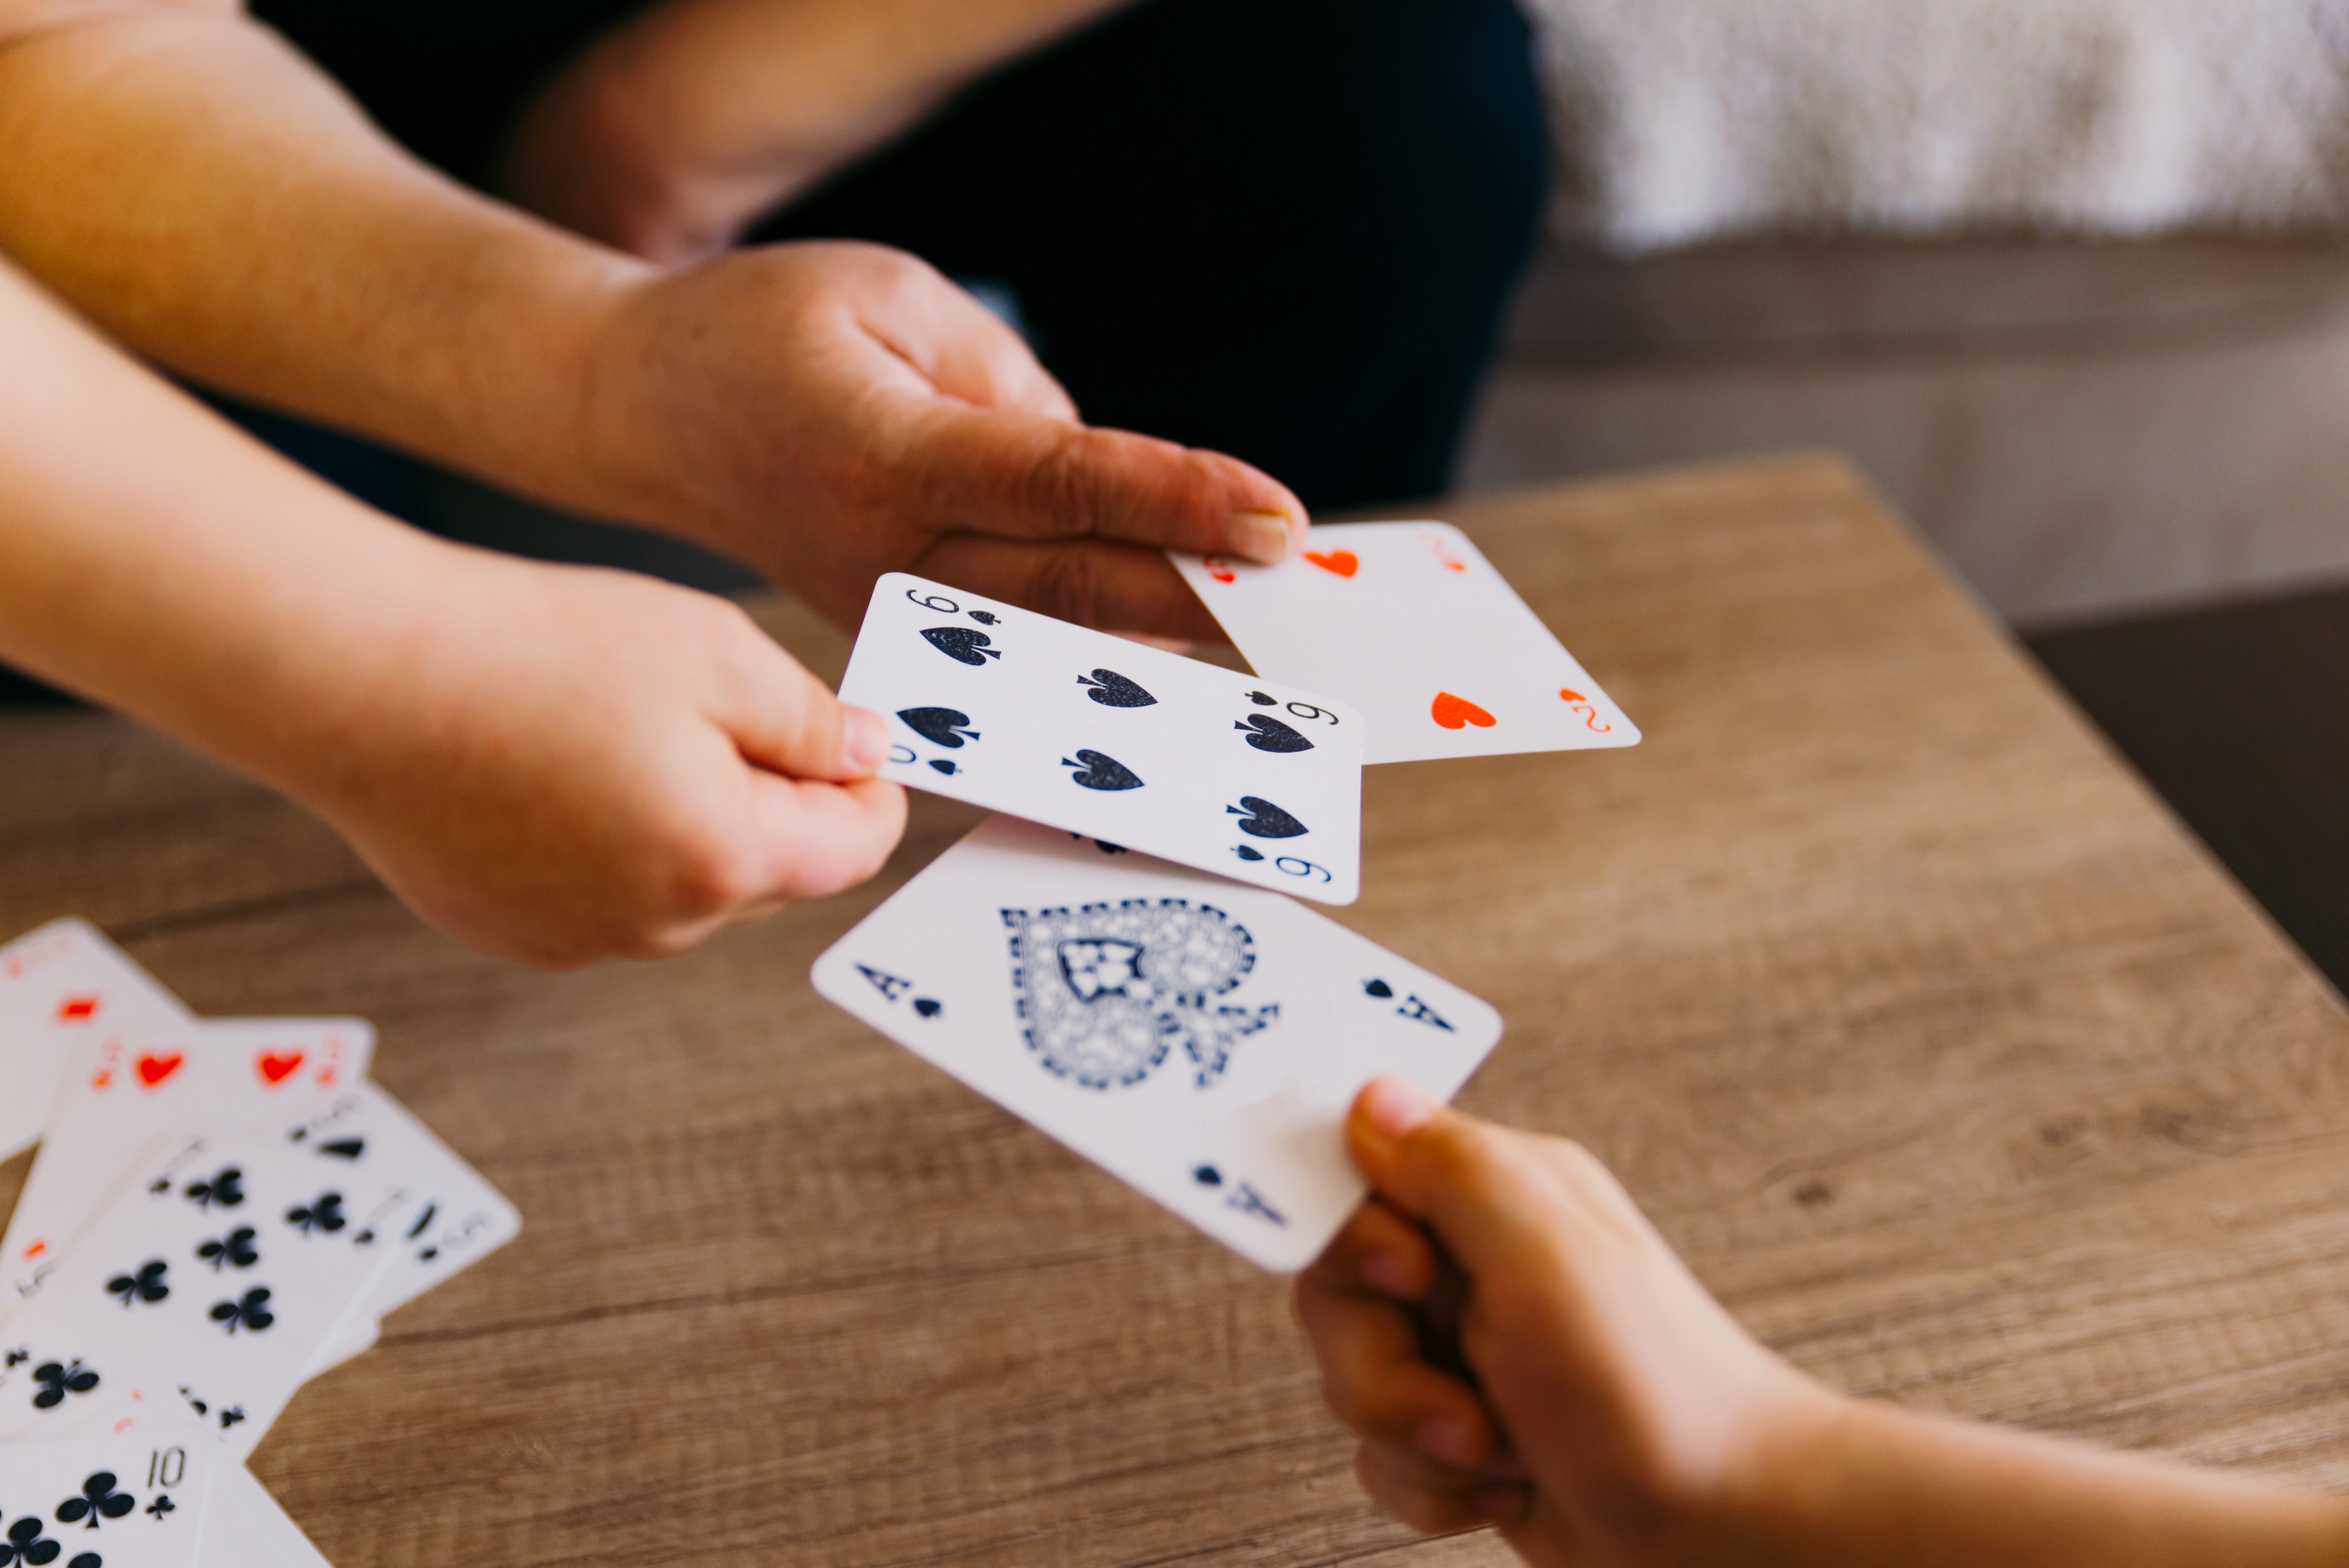 5-fun-easy-cards-games-for-kids-and-adults-casino-reveal